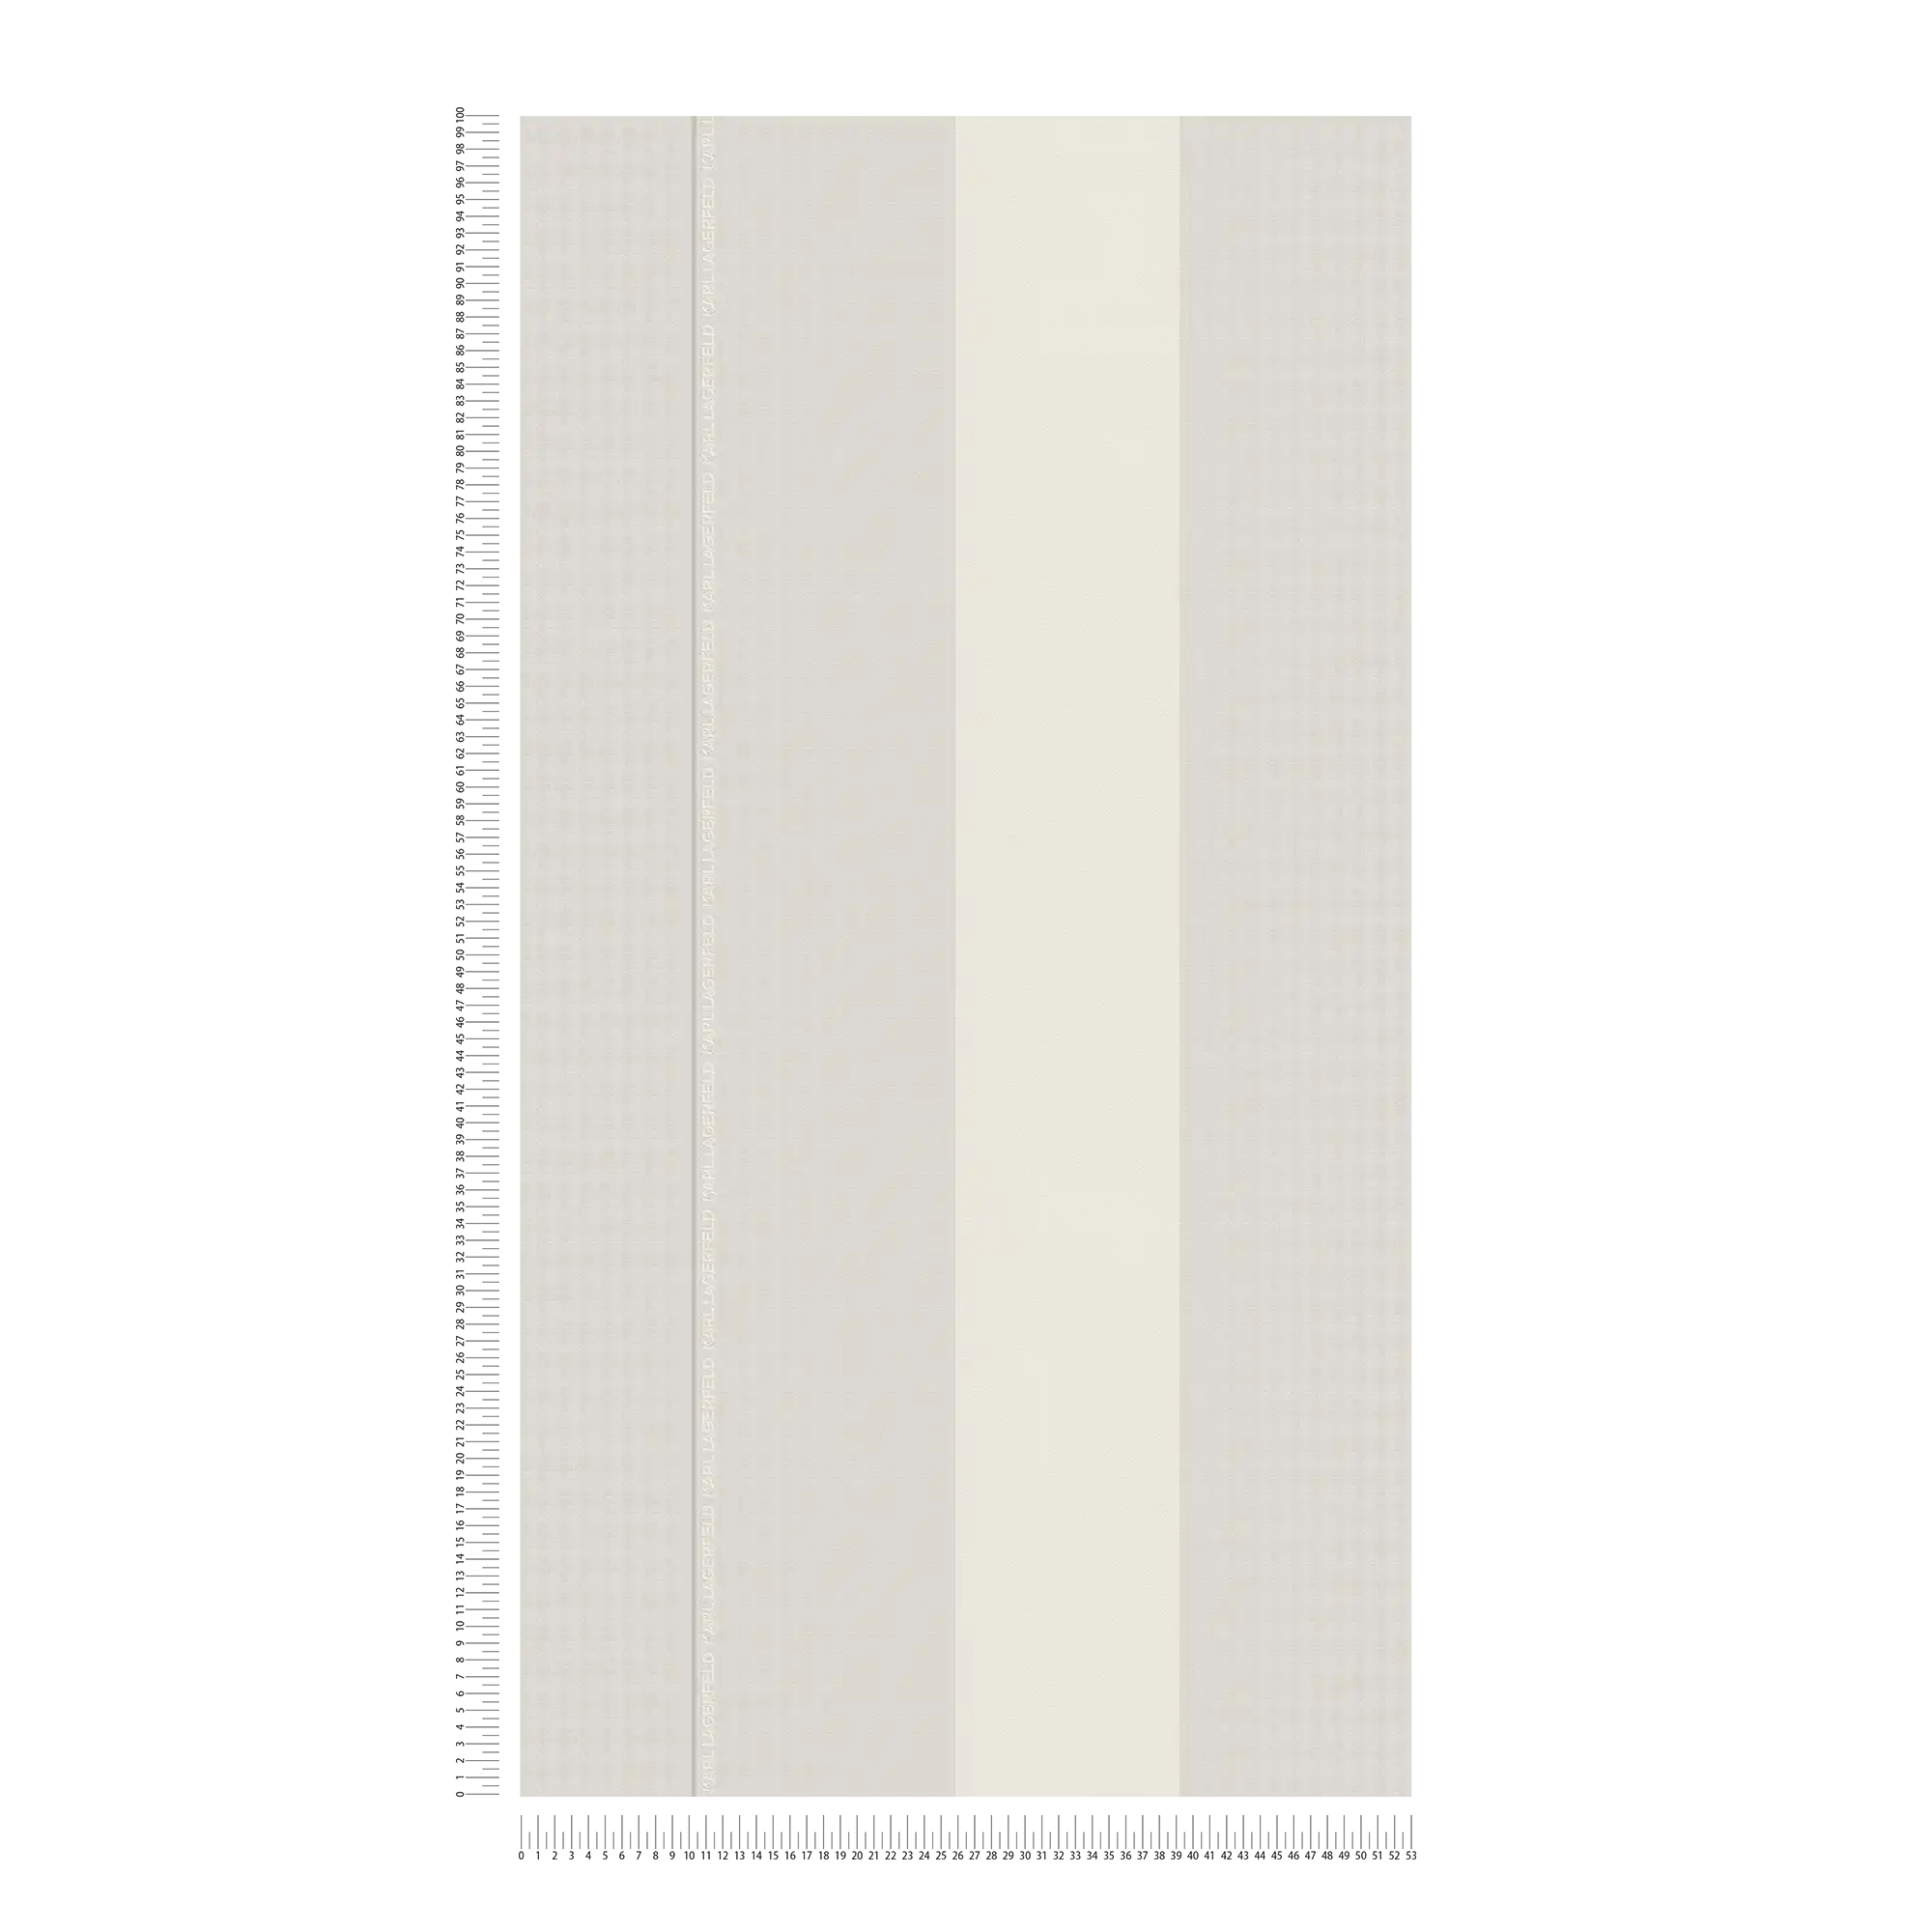             Non-woven wallpaper Karl LAGERFELD striped with texture effect - grey, white
        